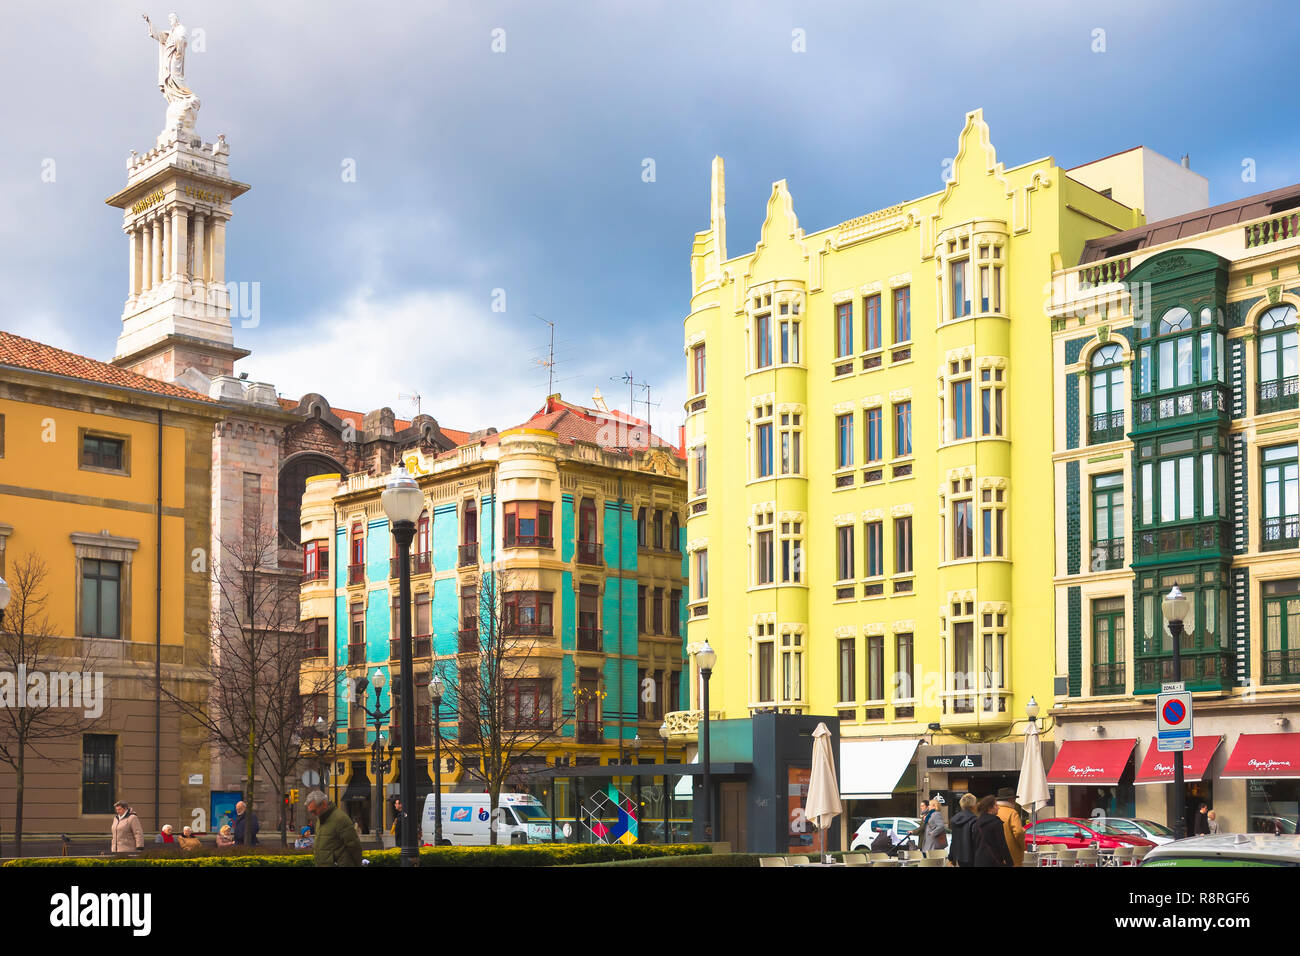 View of classical buildings in Calle Jovellanos from Plaza del Instituto in Gijon, Asturias Spain. Stock Photo